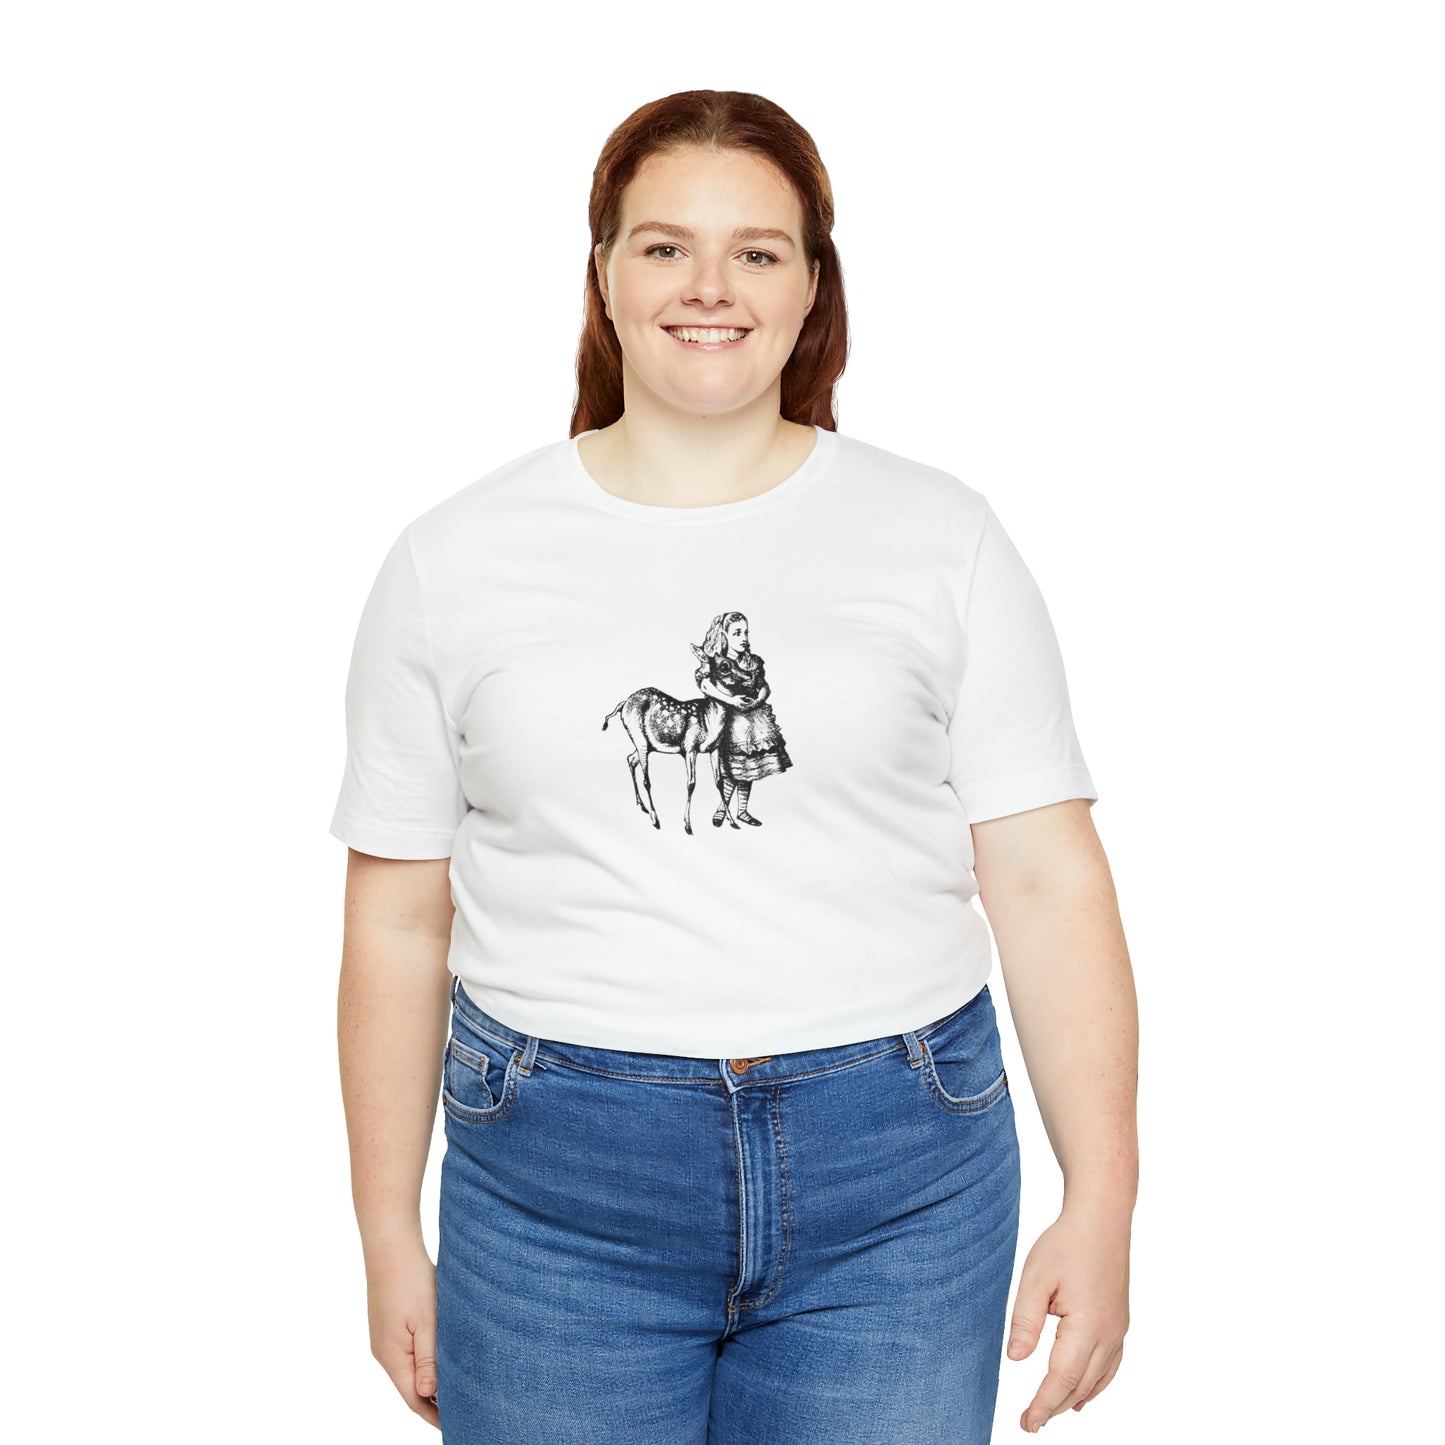 A smiling plus sized woman wearing a white t-shirt with an illustration of Alice in Wonderland and a baby deer printed in black.